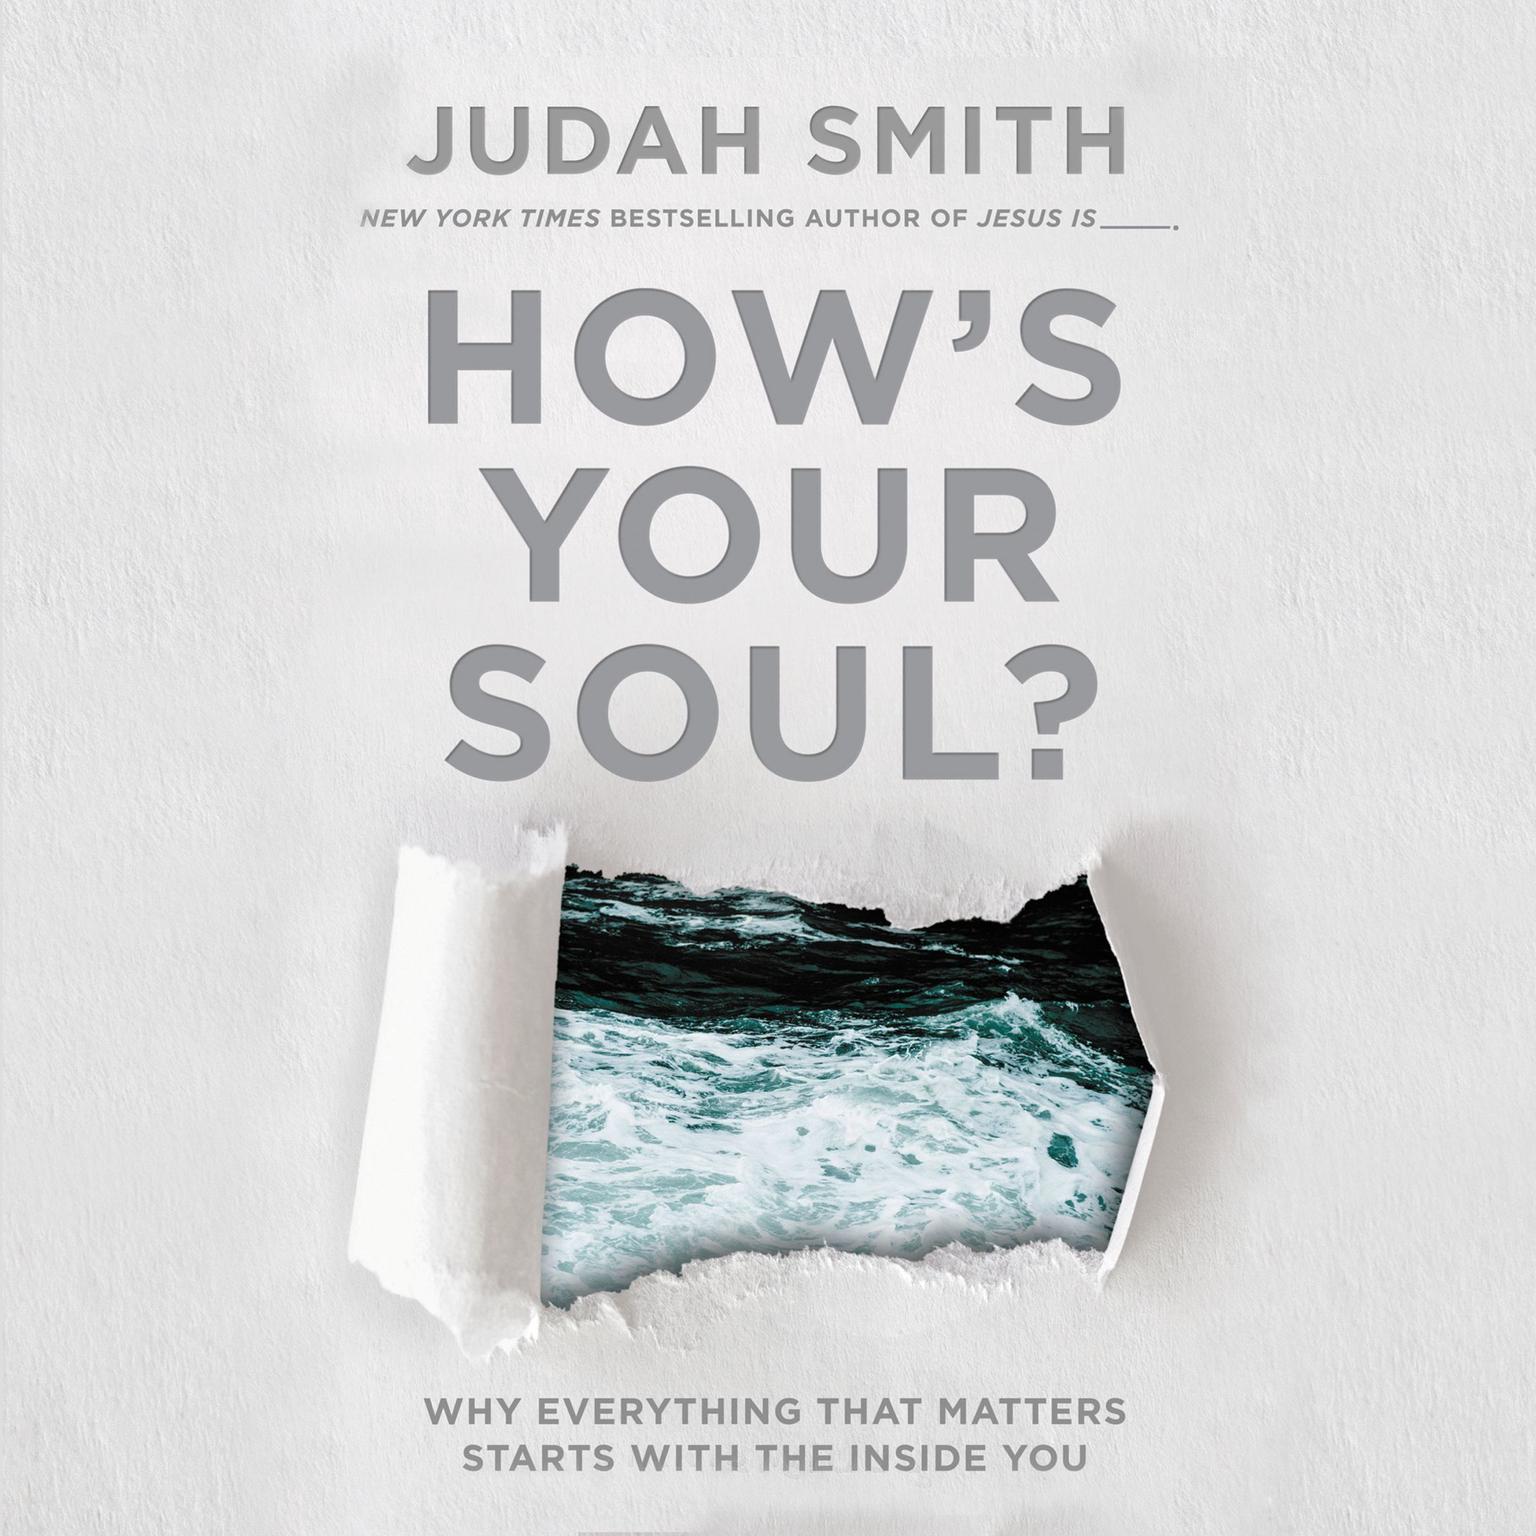 Hows Your Soul?: Why Everything That Matters Starts With The Inside You Audiobook, by Judah Smith